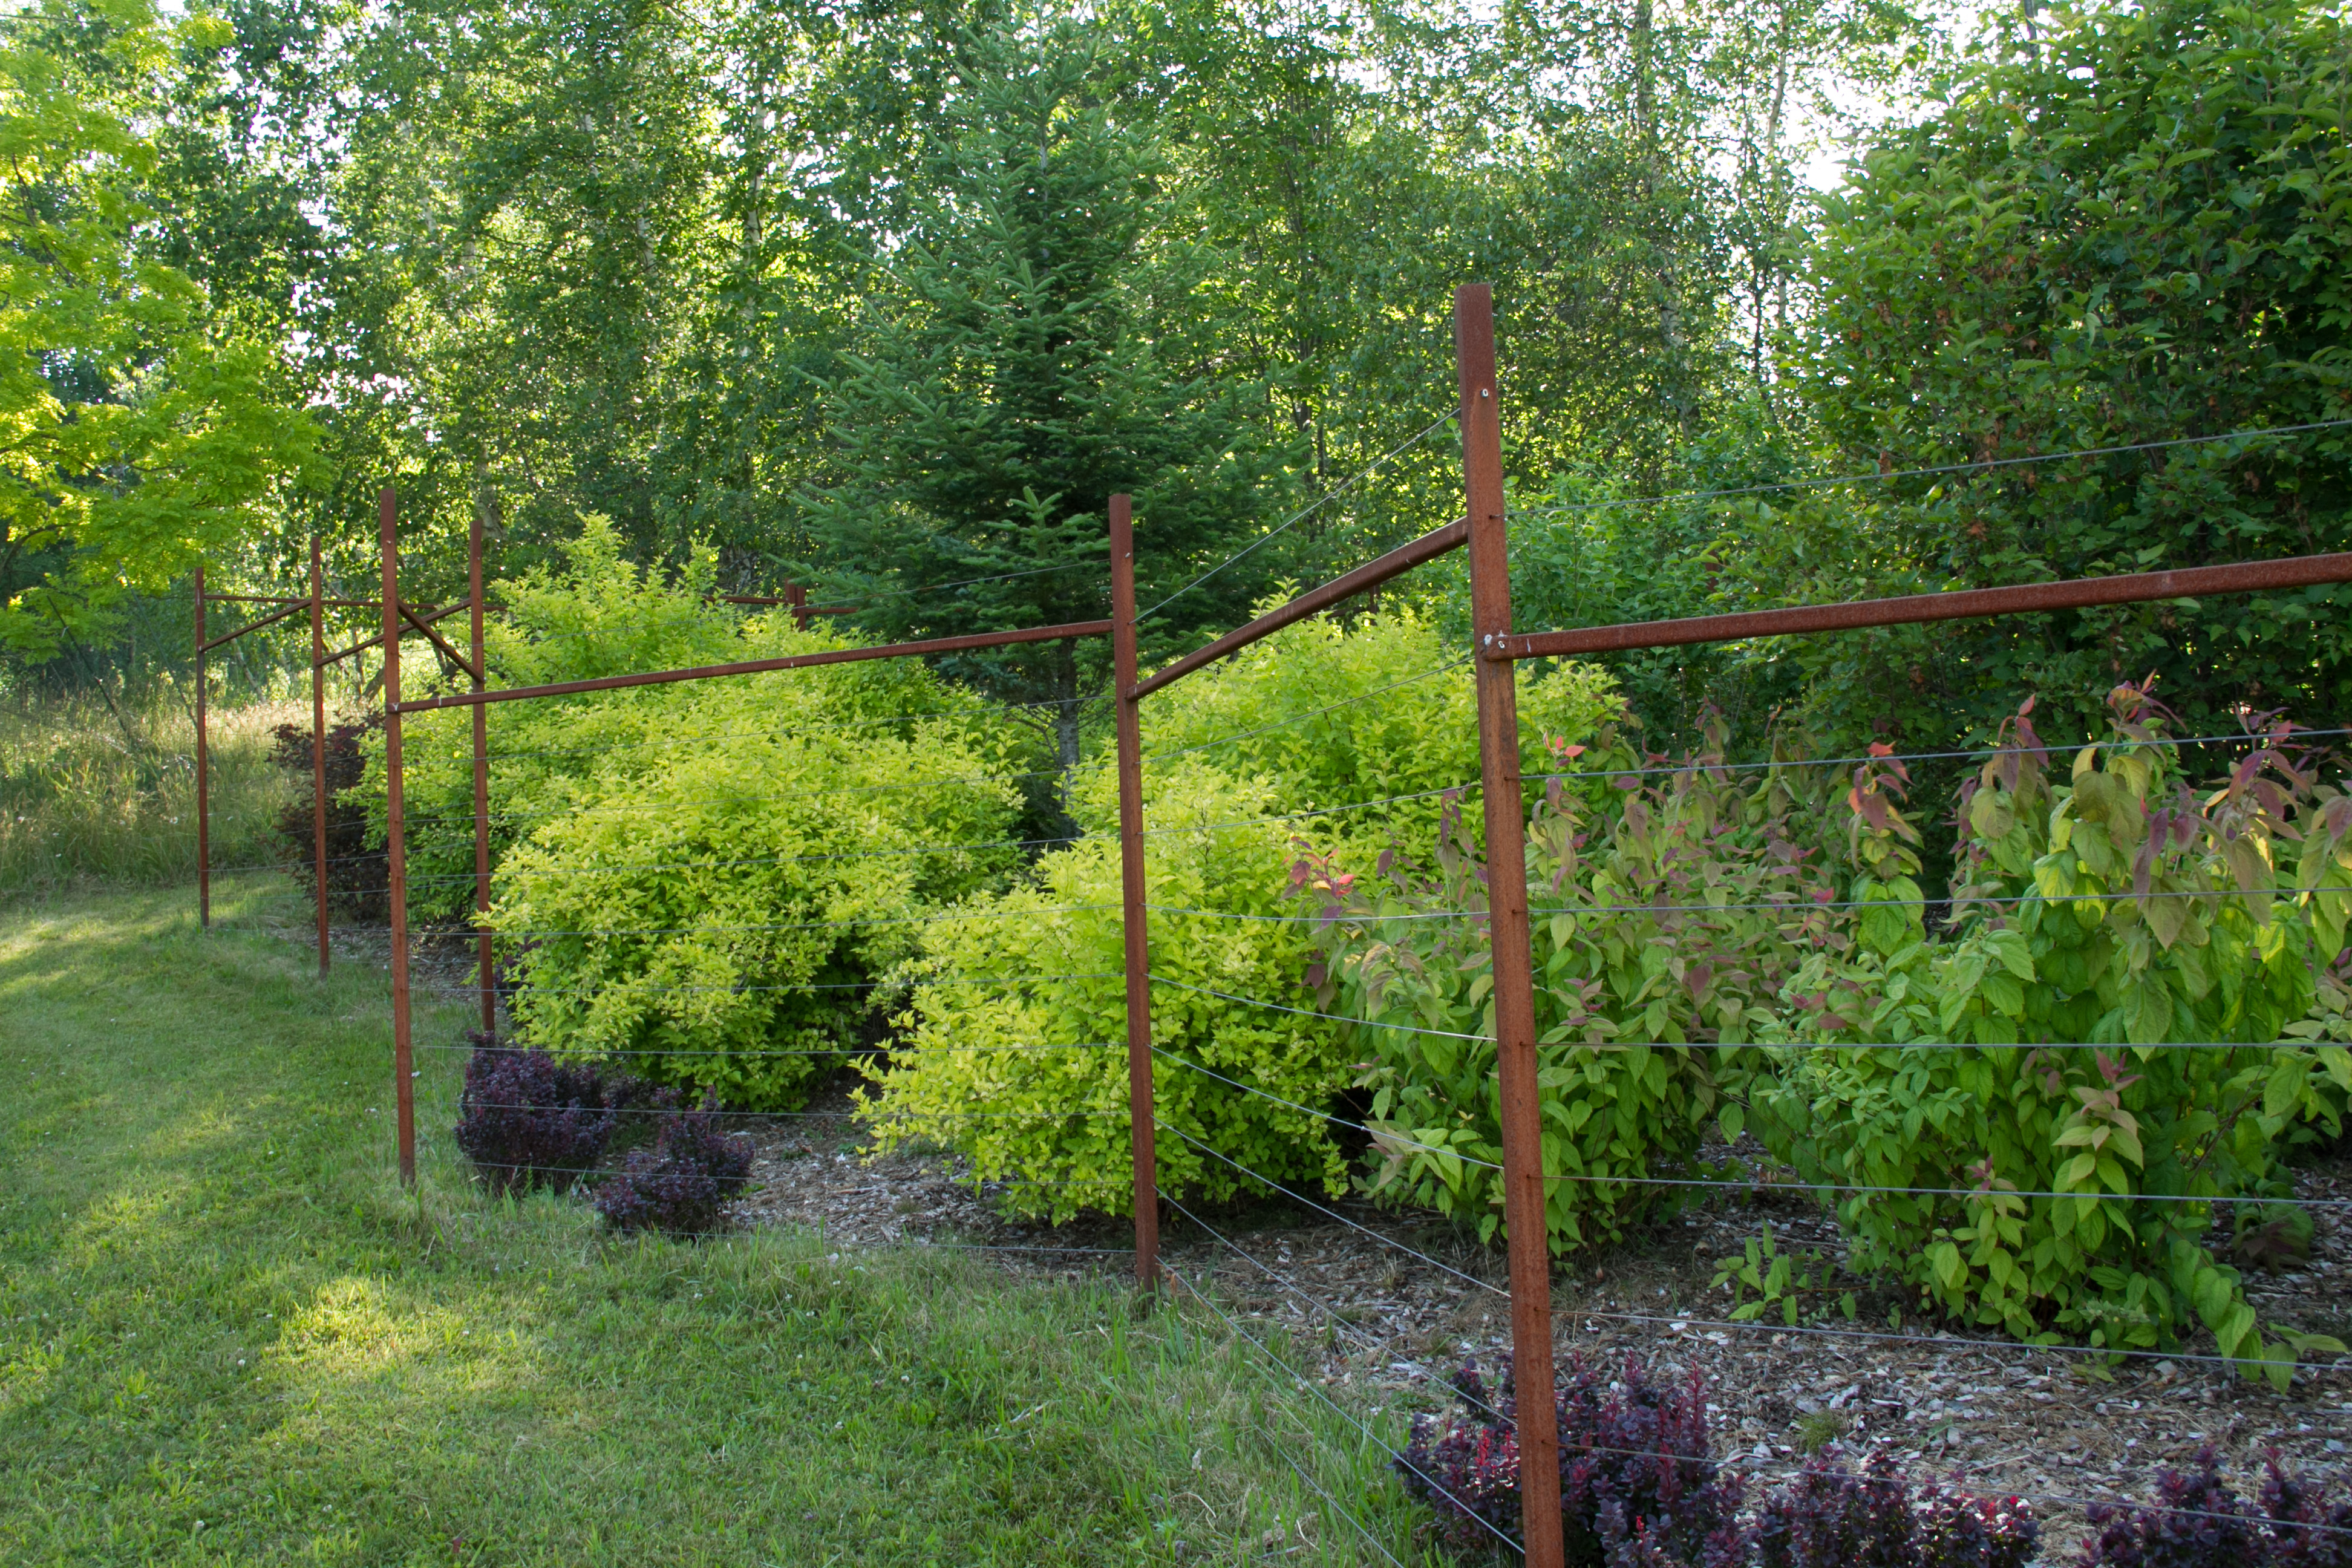 The fence here is protecting shrubs against the deer. I've used this design in fences at several places in the garden at Glen Villa.